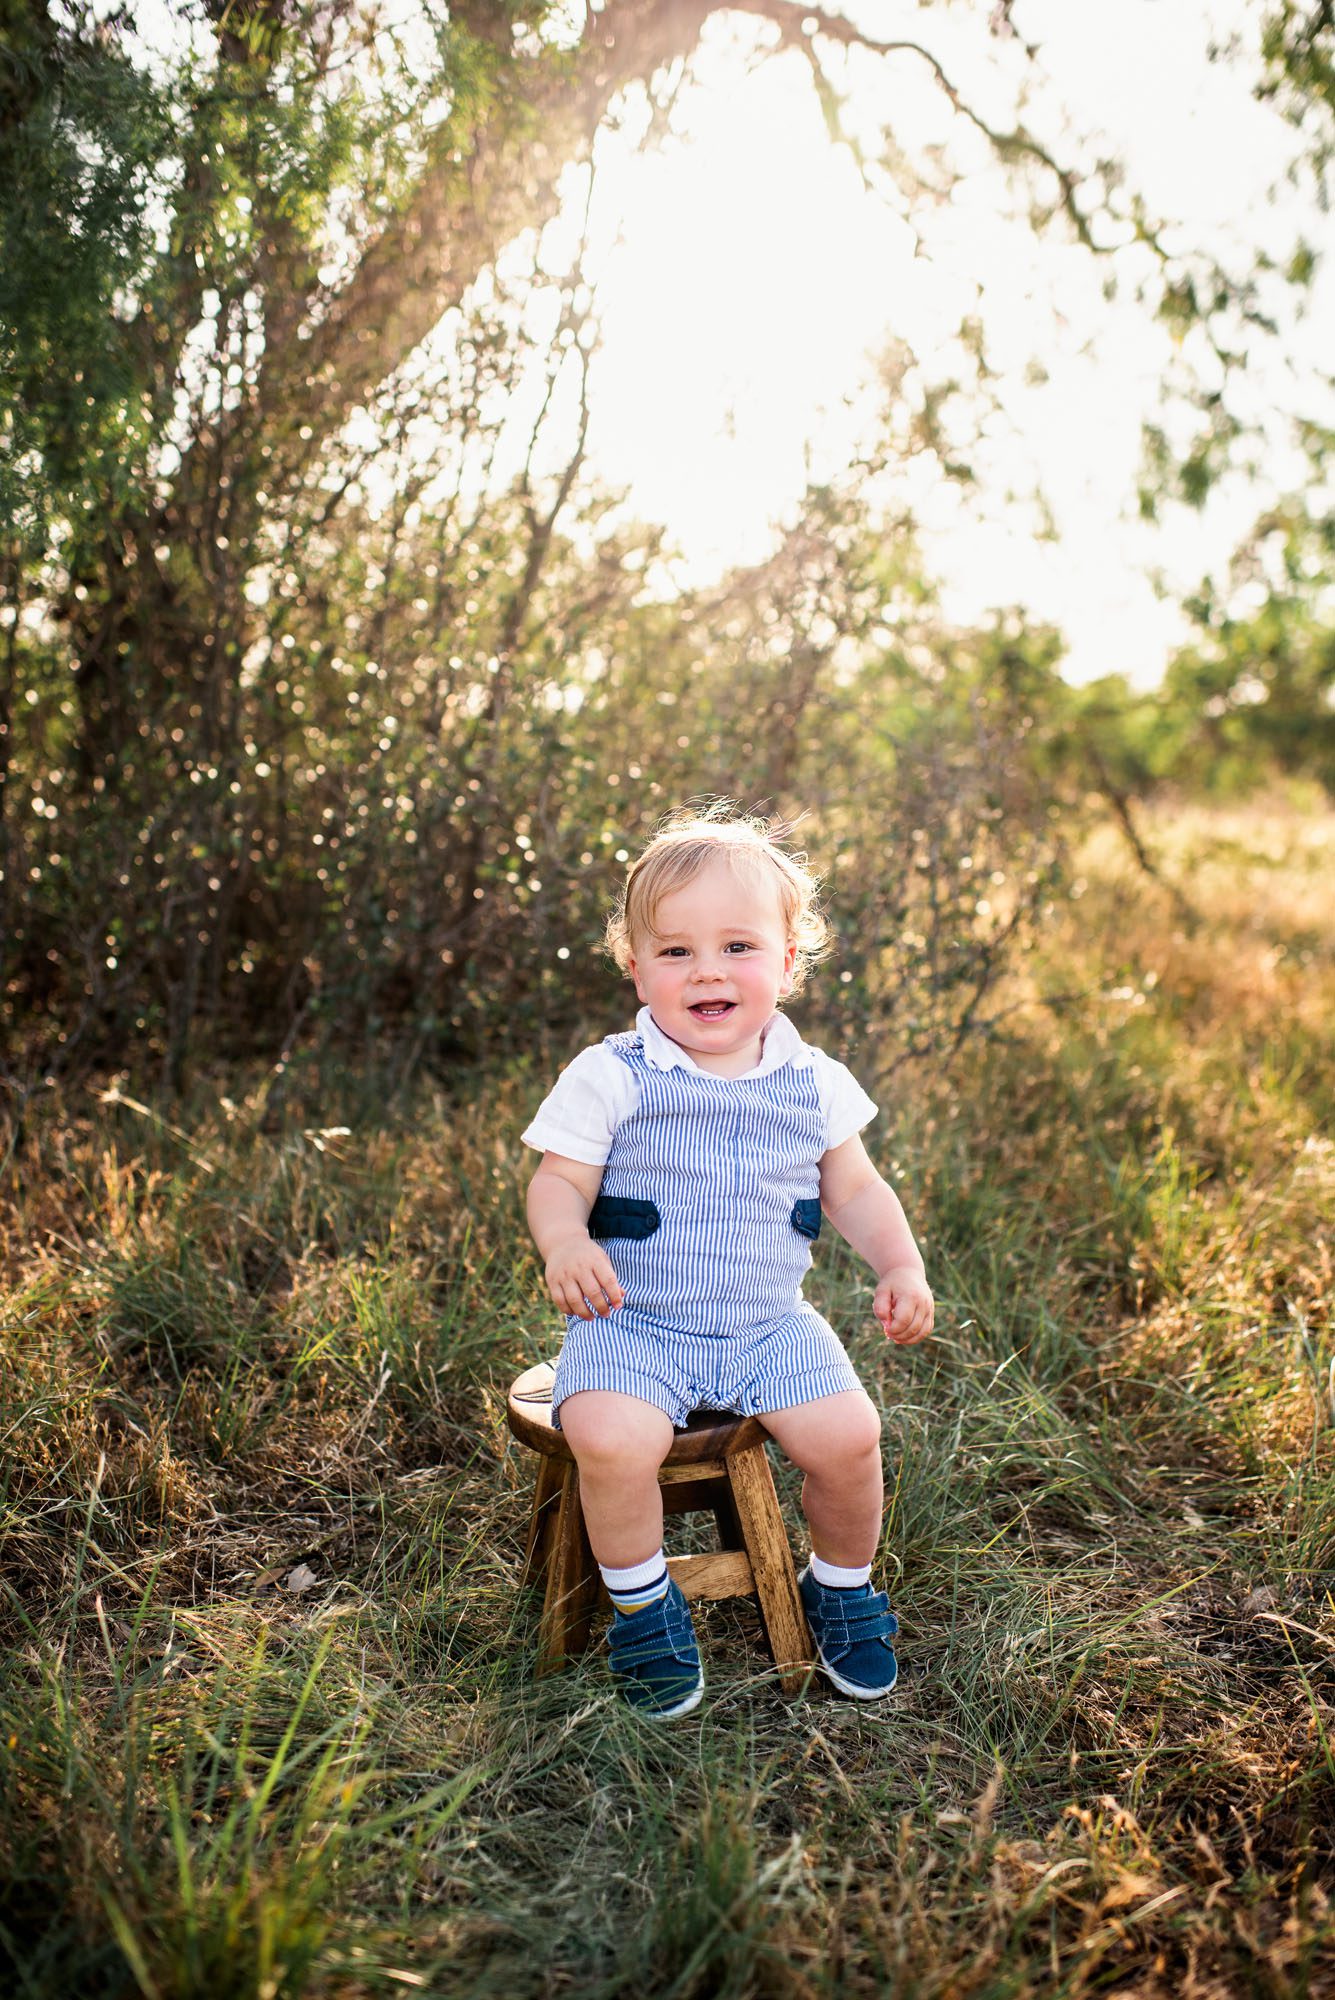 Baby sitting on stool in the grass, San Antonio family photographer